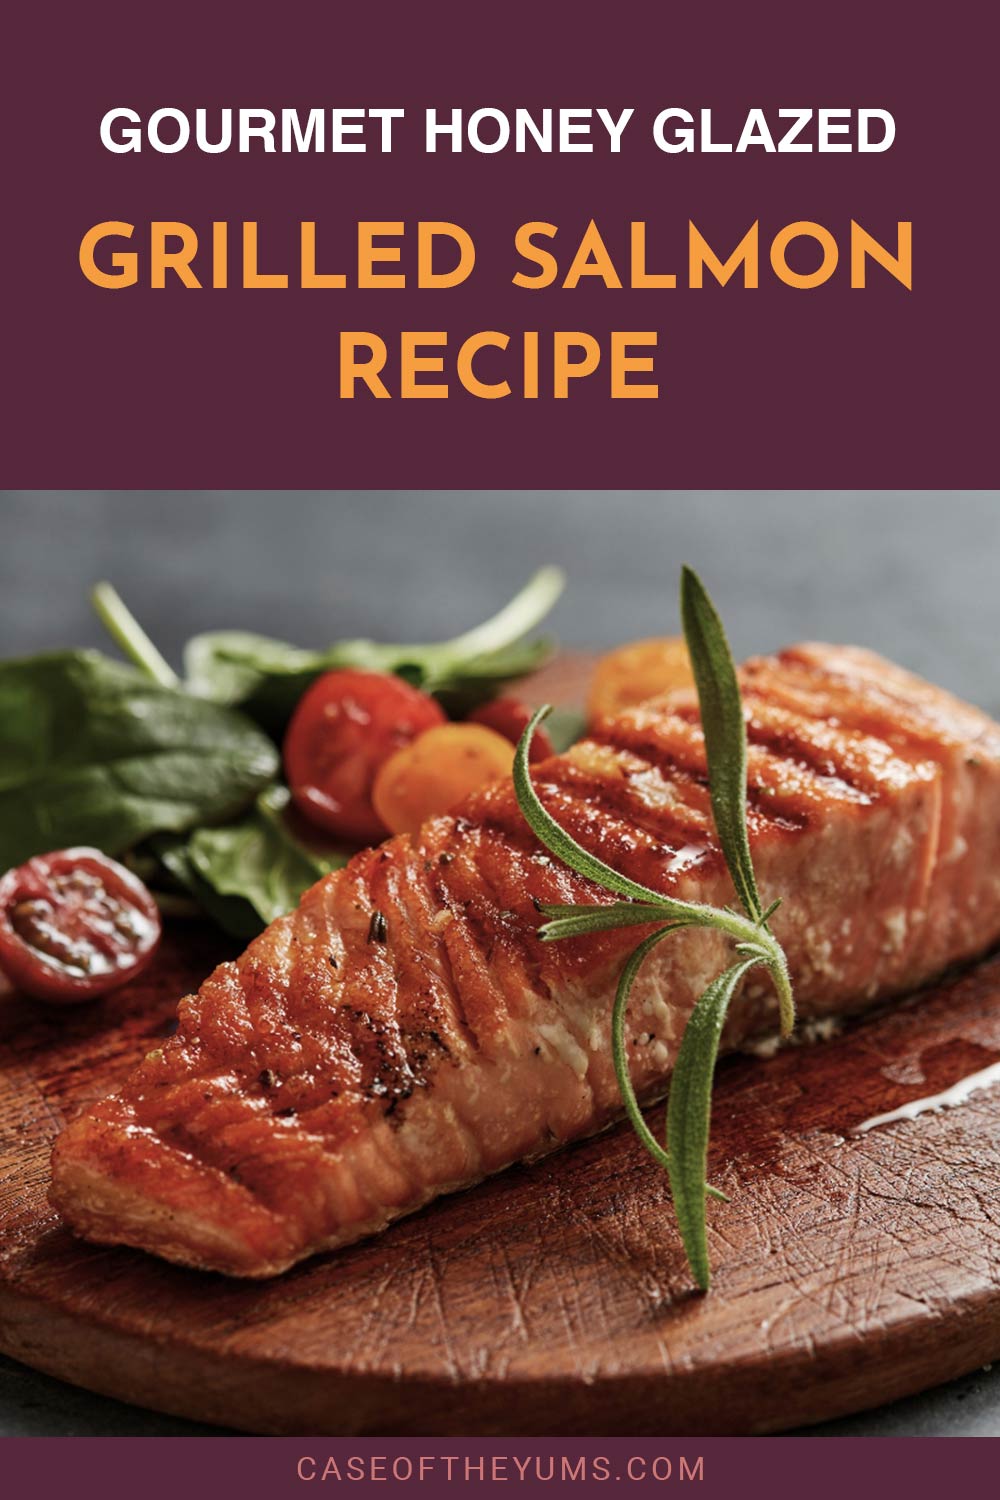 Fish recipe on a wooden surface - Gourmet Honey Glazed Grilled Salmon .